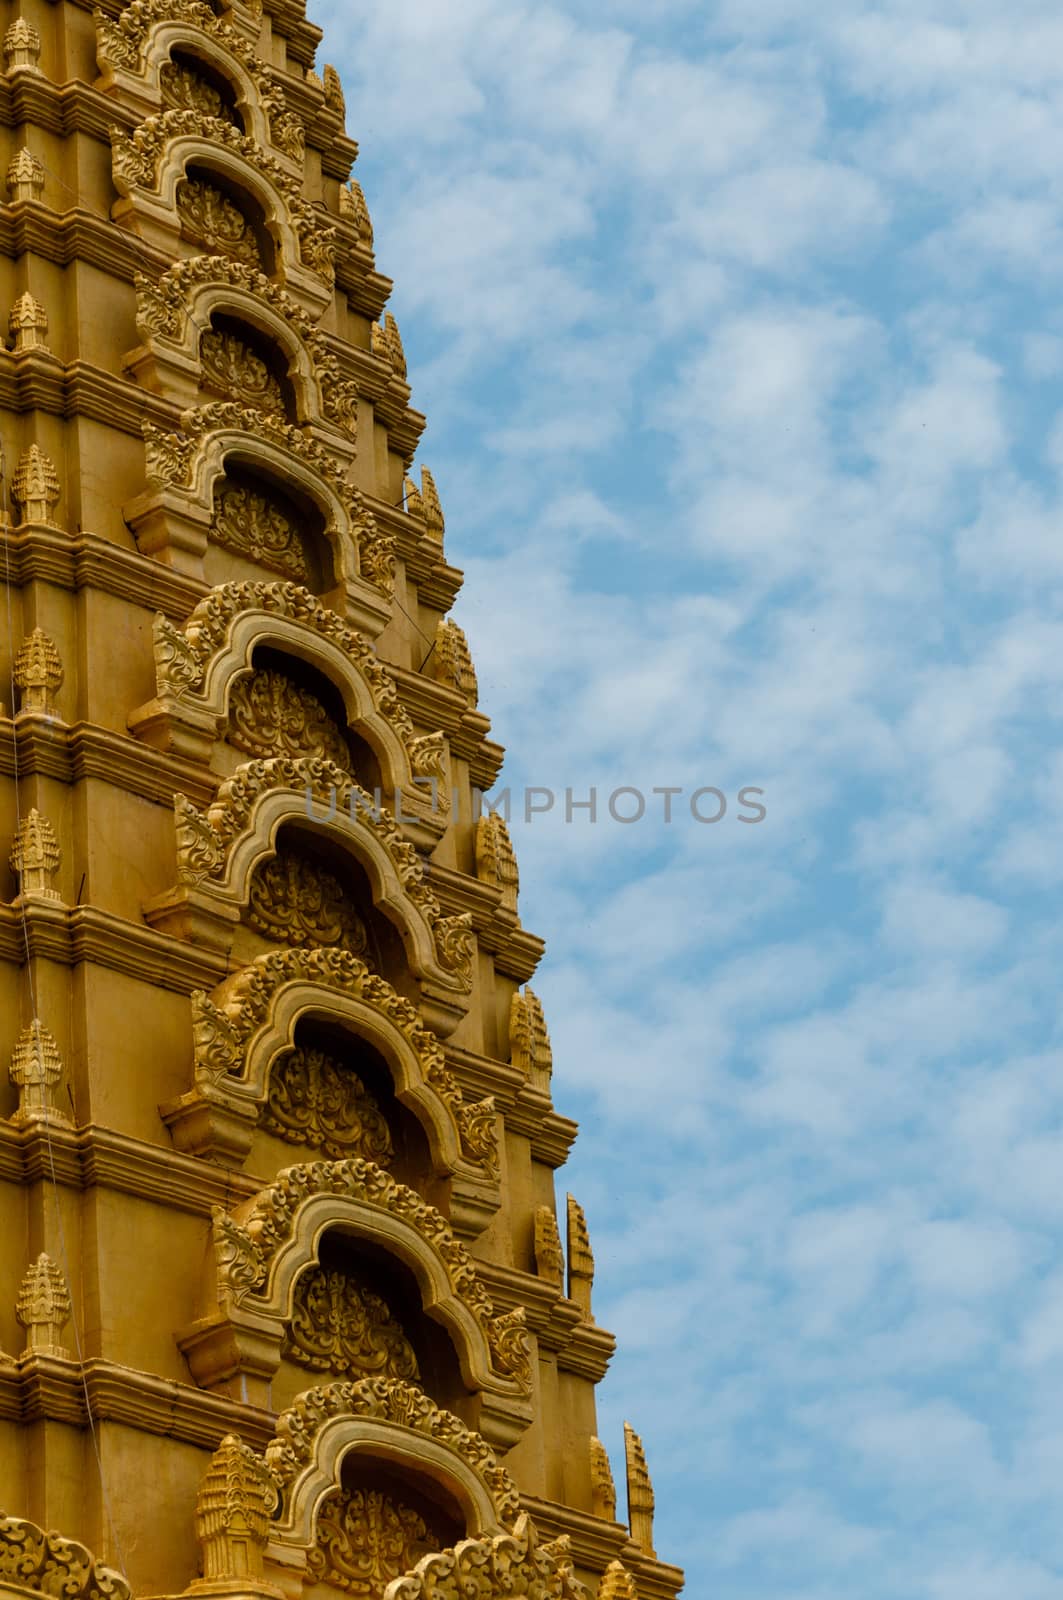 Golden temple in front of beautiful blue and cloudy sky